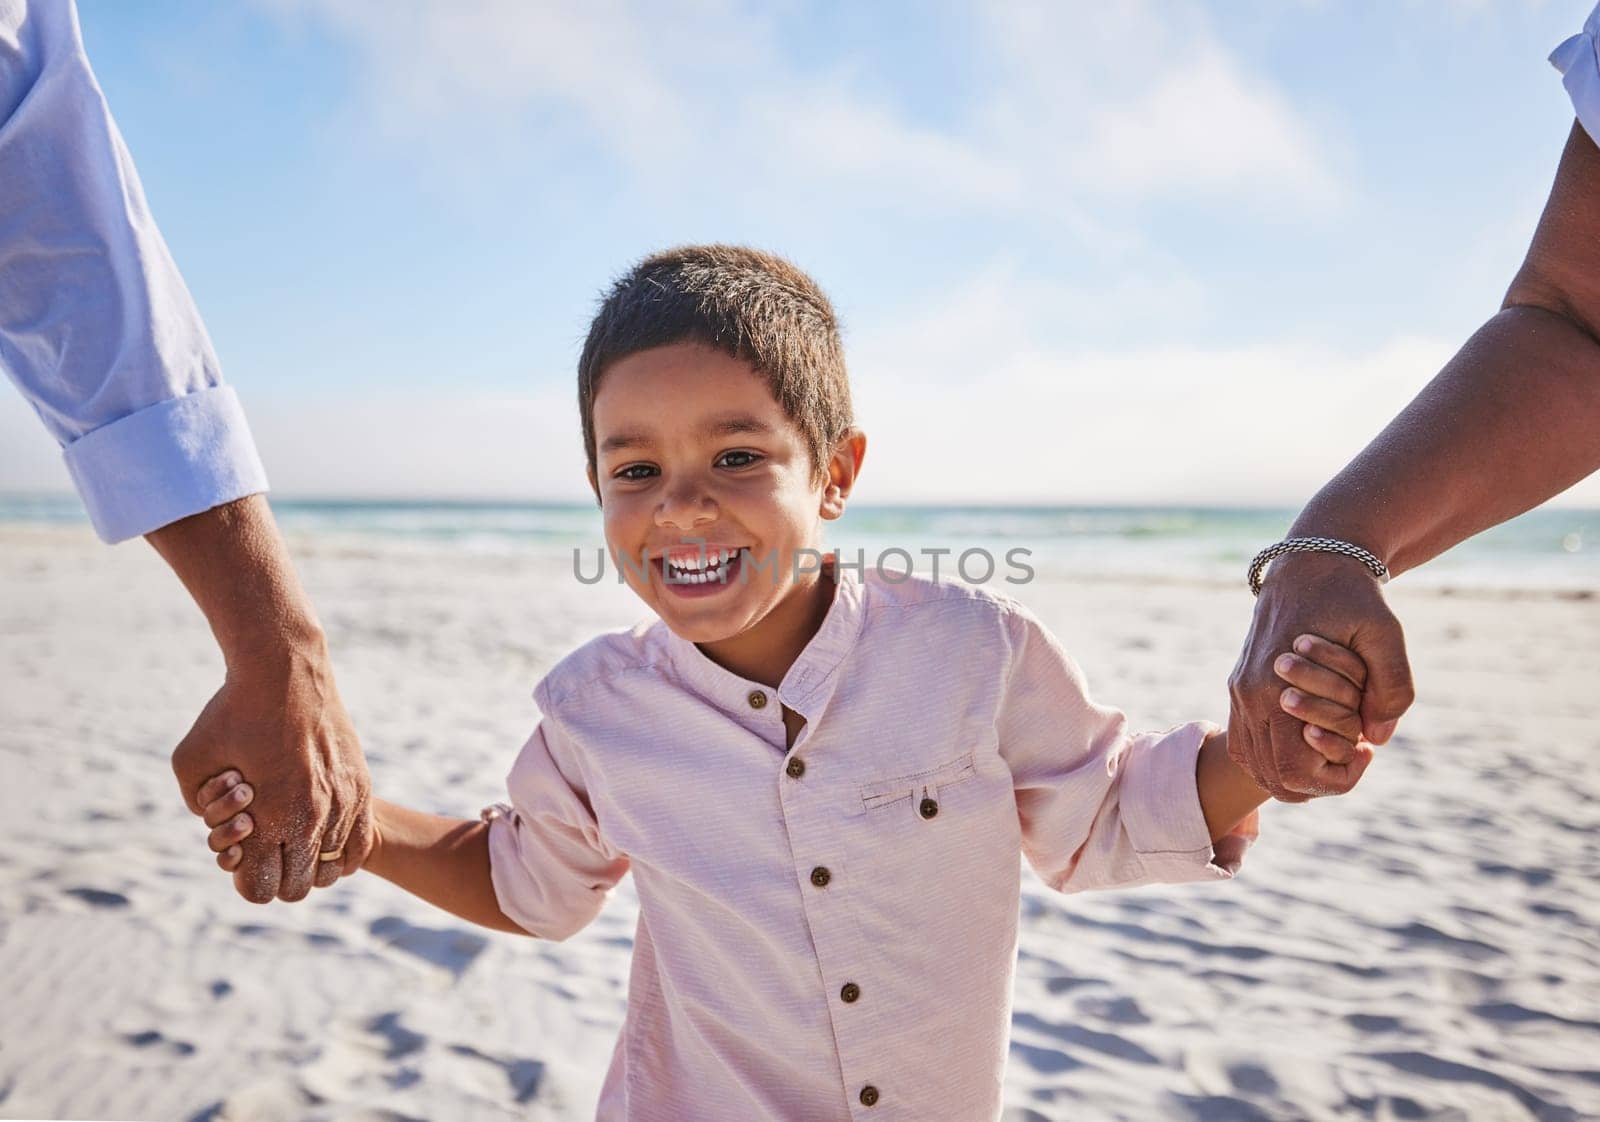 Holding hands, beach or portrait of a happy kid walking on a holiday vacation together with happiness. Parents, mother and father playing or enjoying family time with a young boy or child in summer by YuriArcurs